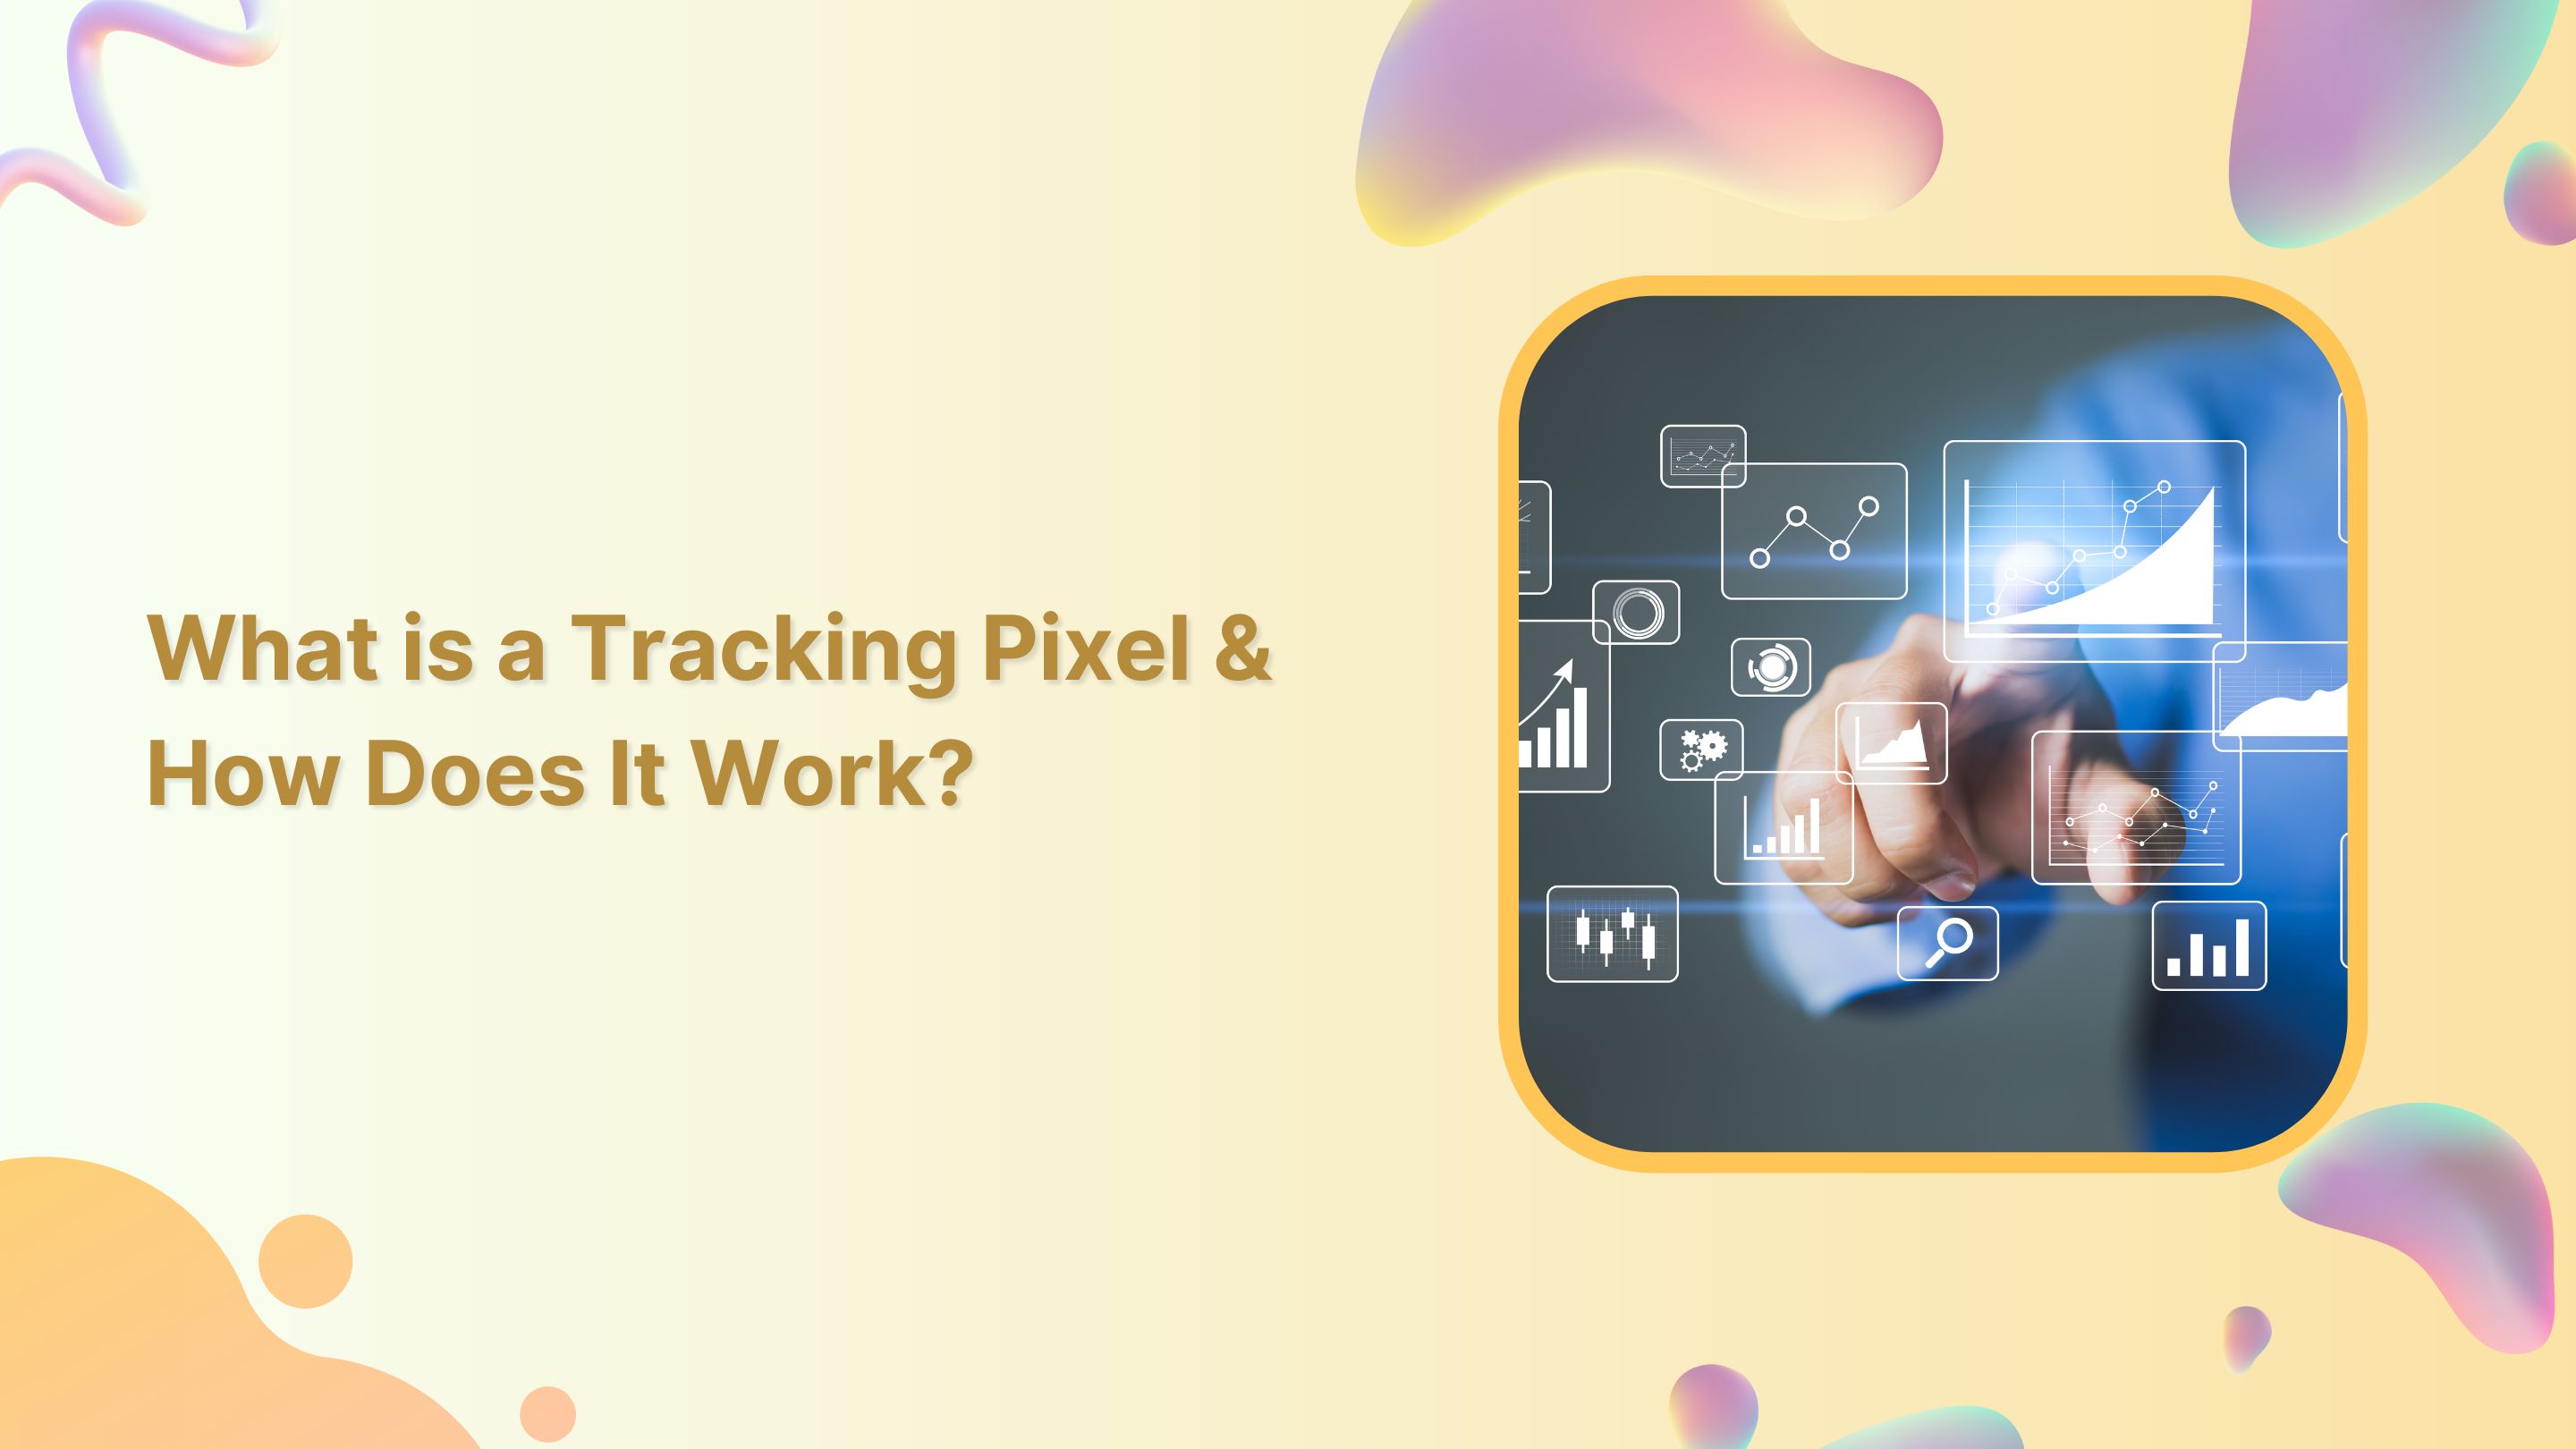 What is a Tracking Pixel and How Does it Work?